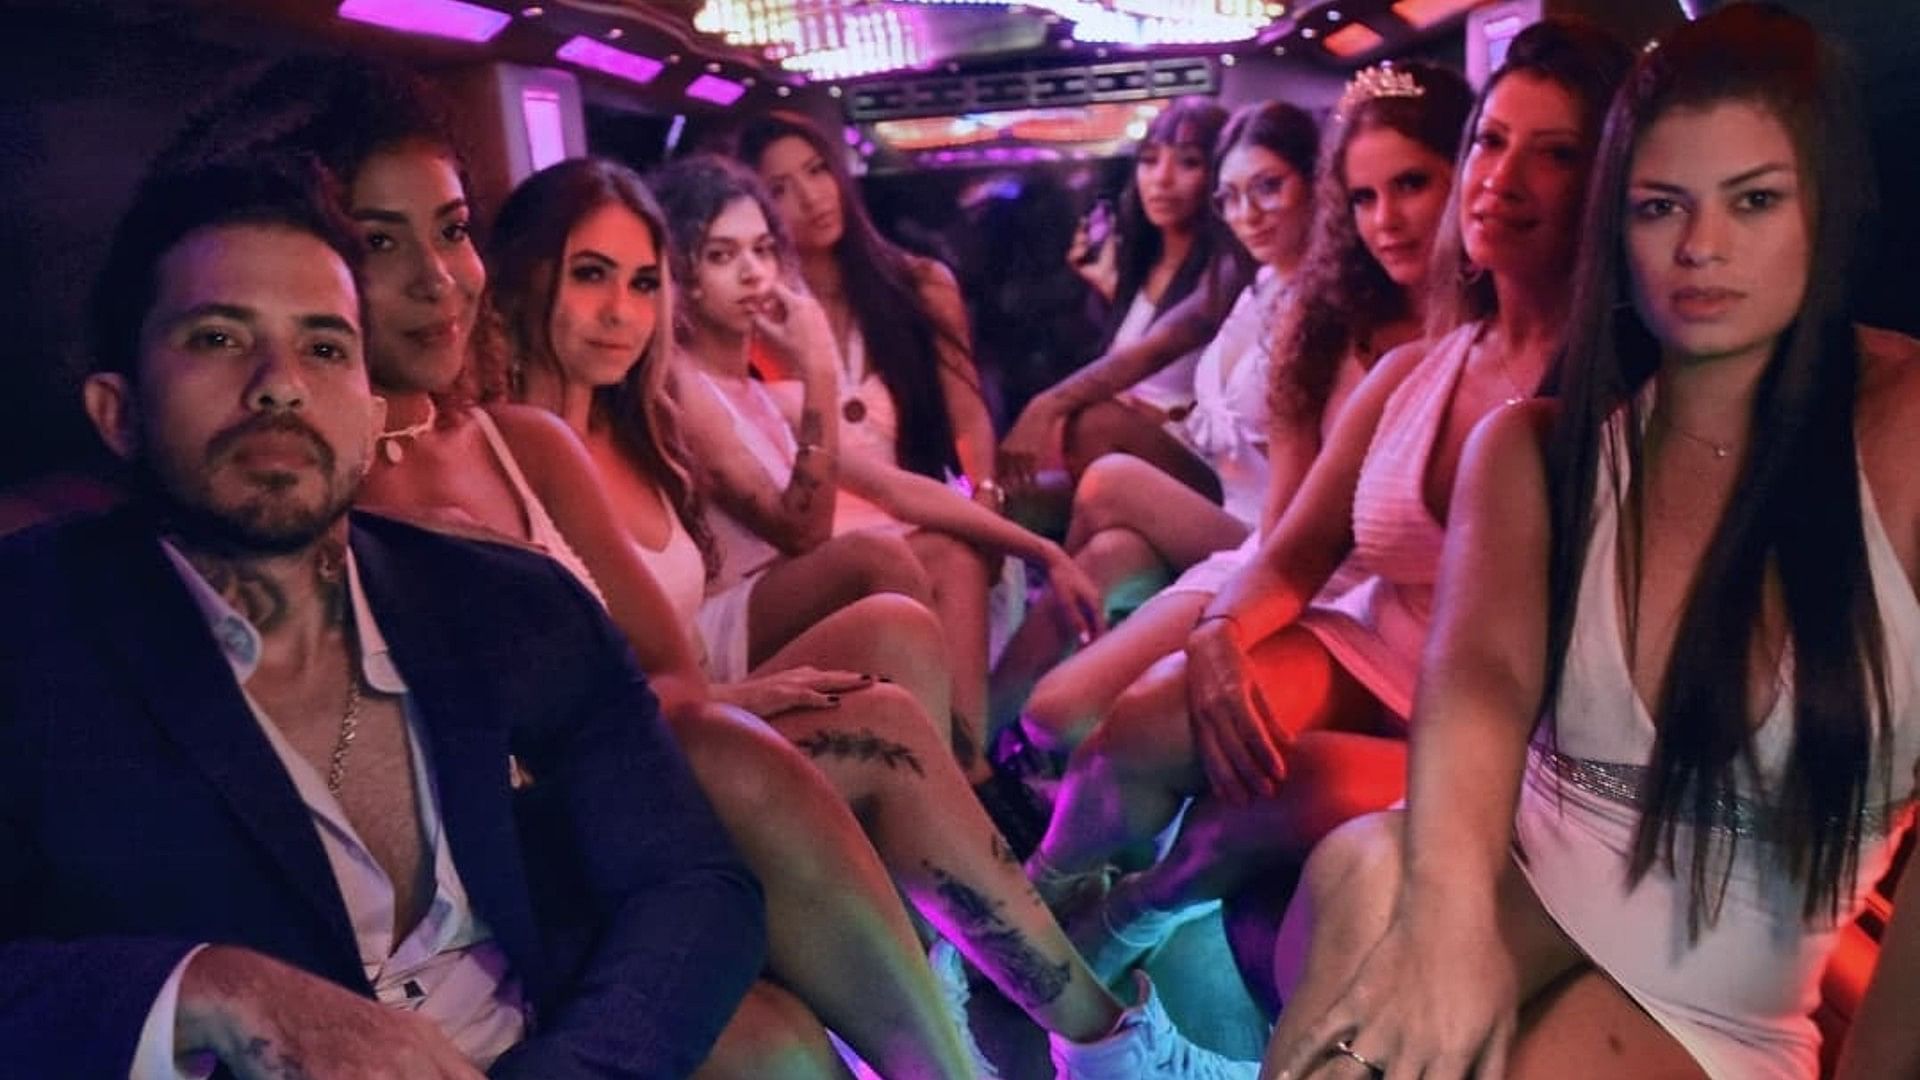 Arthur O Urso got into trouble after marrying 9 girls time table made to love everyone equally